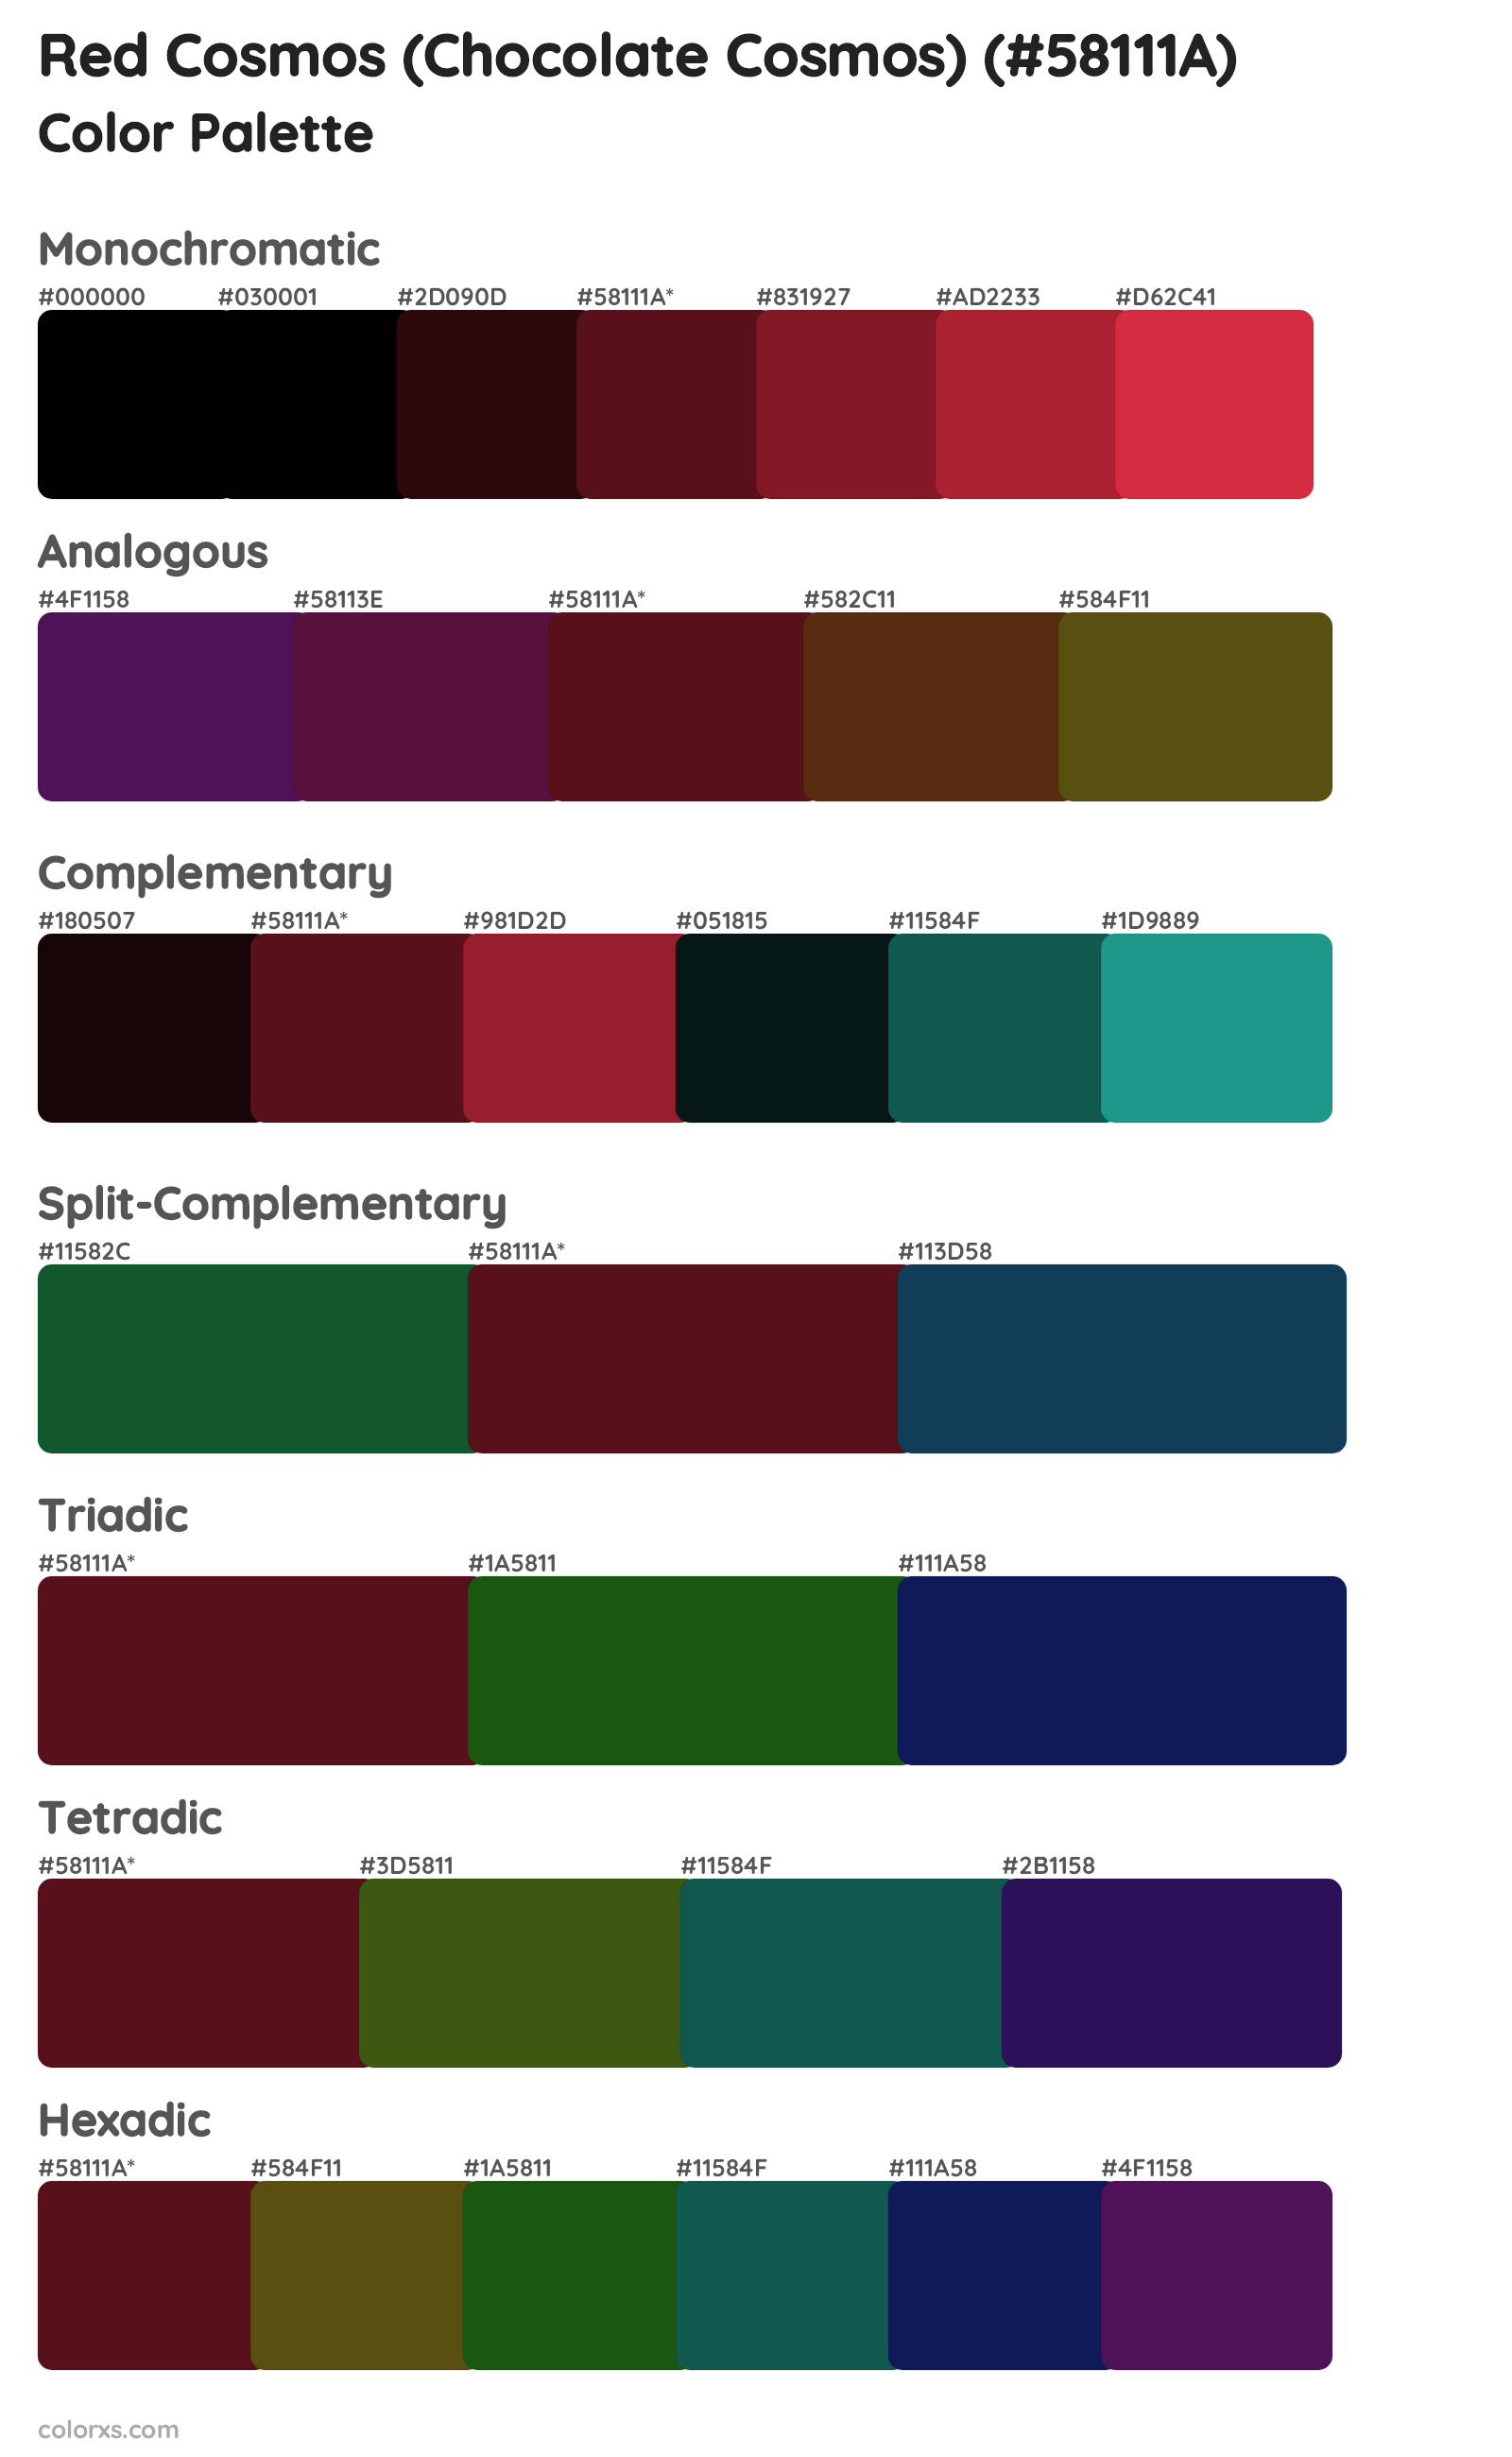 Red Cosmos (Chocolate Cosmos) Color Scheme Palettes